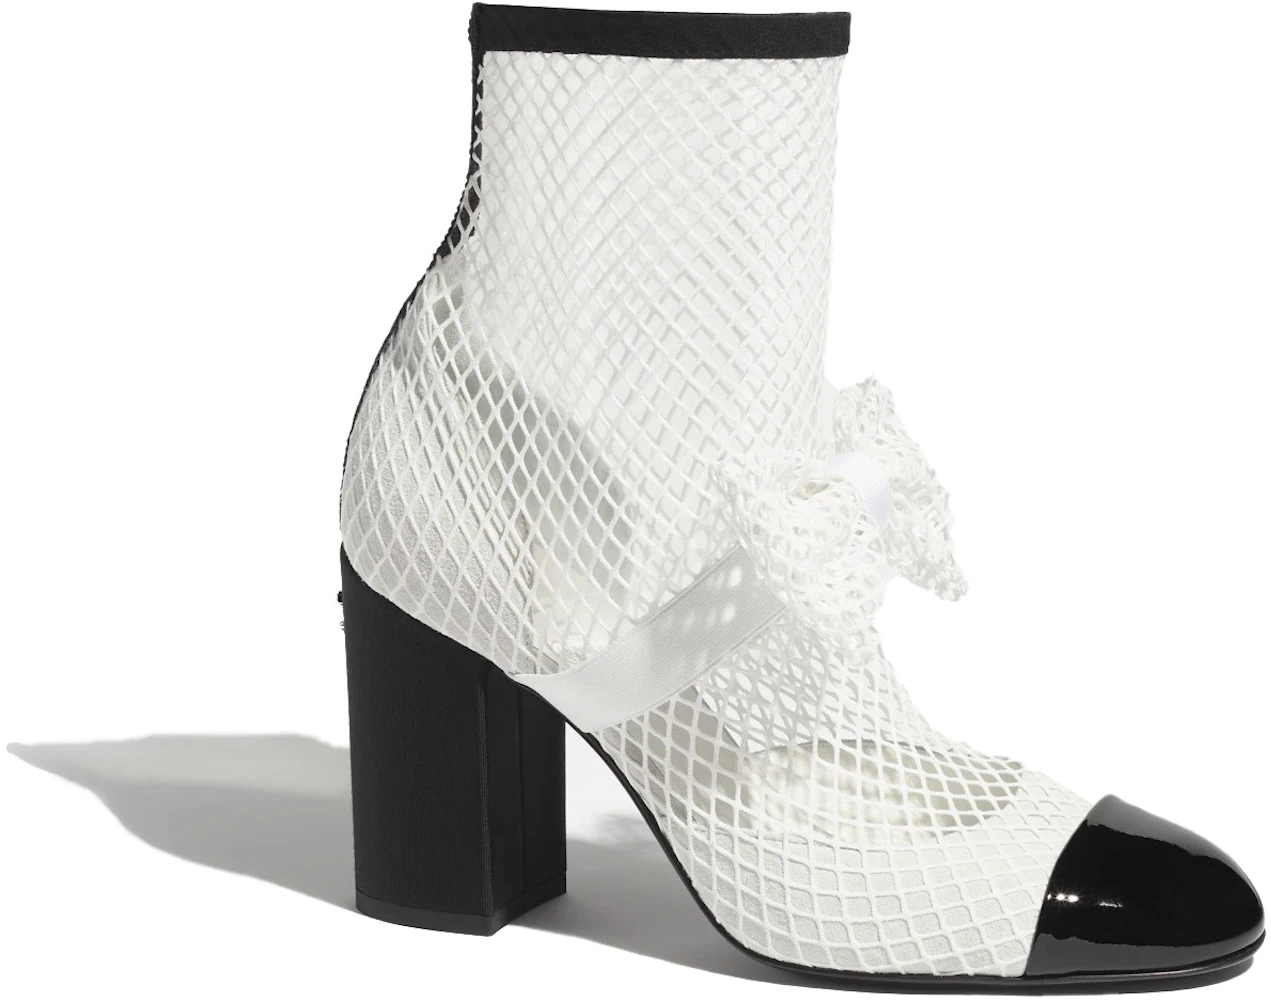 CHANEL Tweed and Patent Calfskin Mary Janes, White/Black - Retail $1350 F/W  22